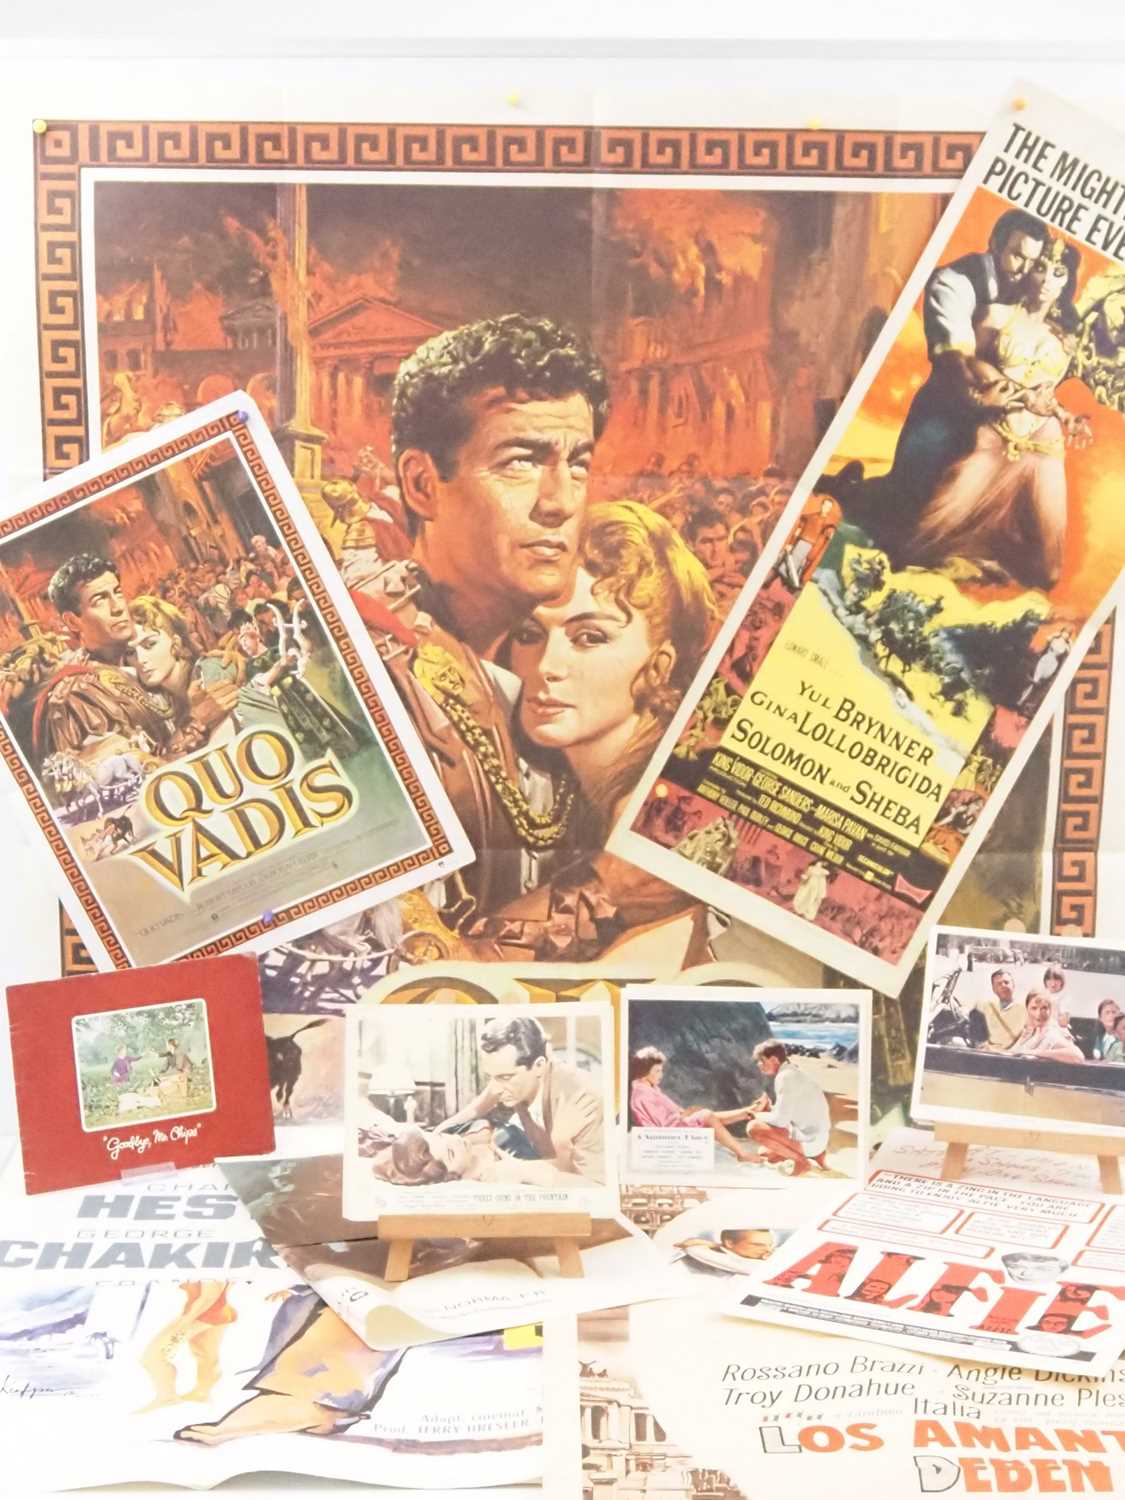 ROMANCE: A group of film memorabilia items for a selection of romantic film titles comprising: QUO